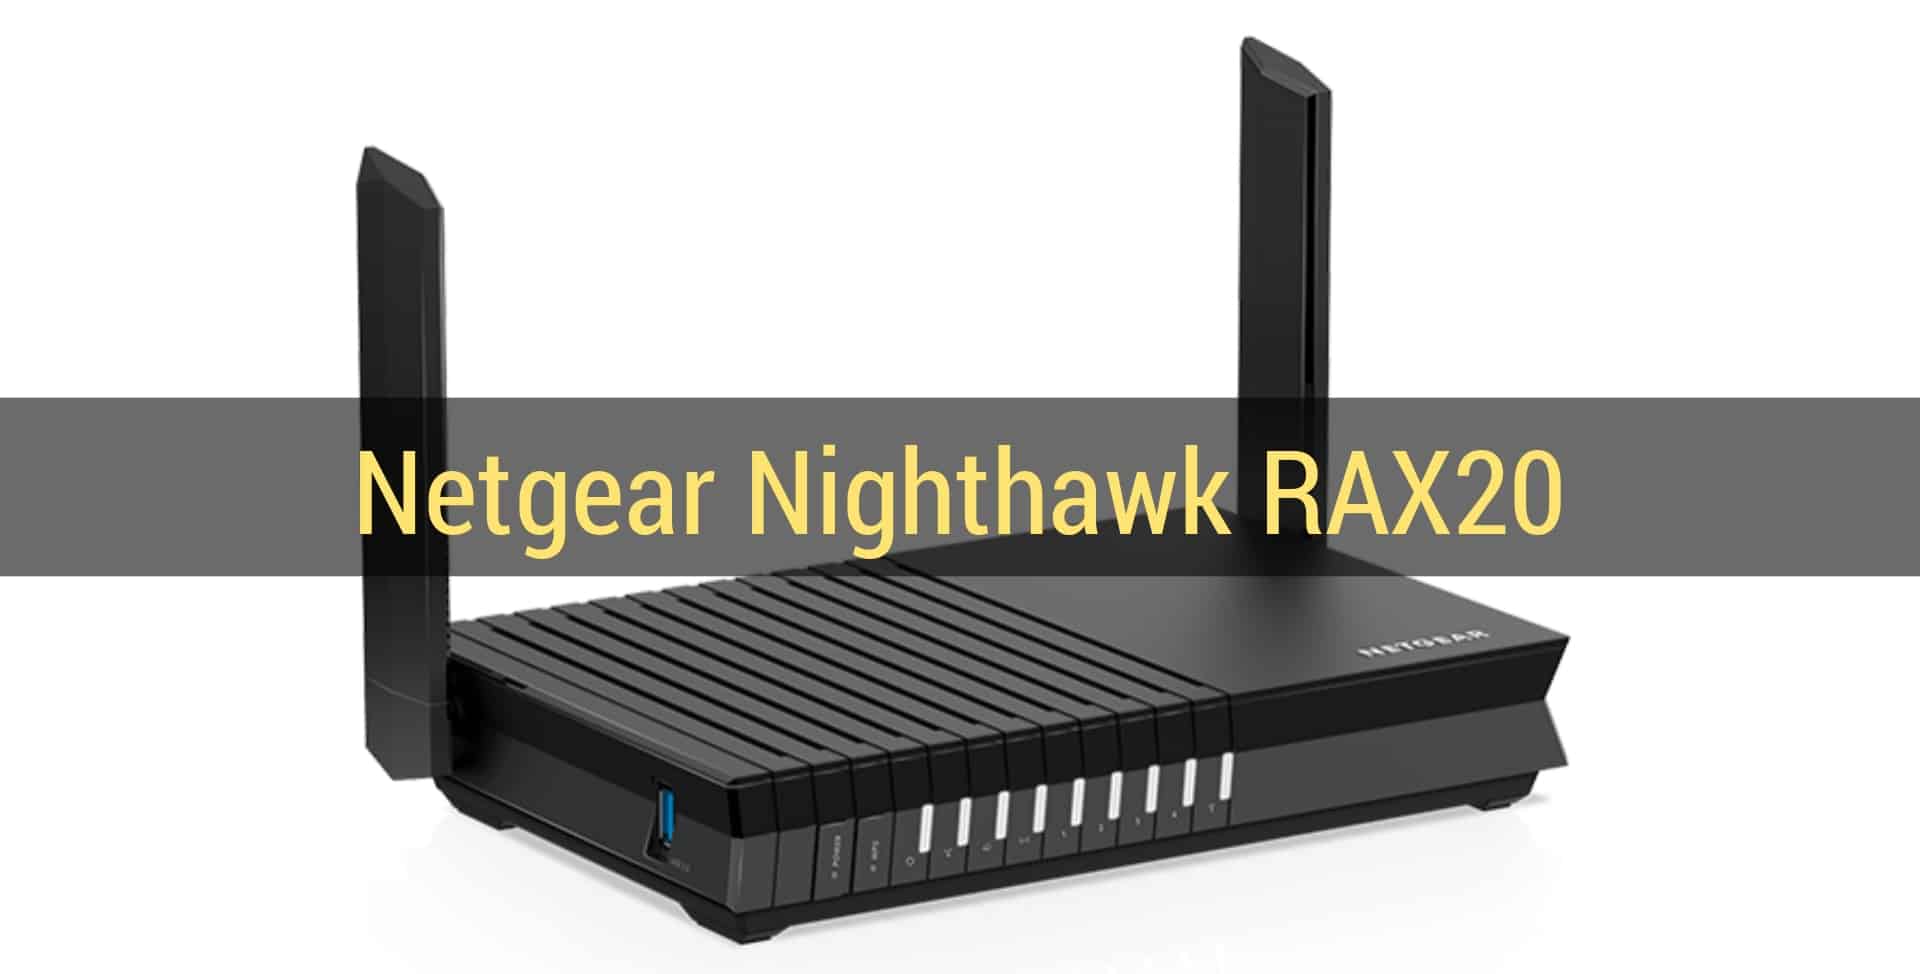 Netgear Launches Nighthawk RAX20 Wi-Fi 6 Router With Dual-Band Support in India